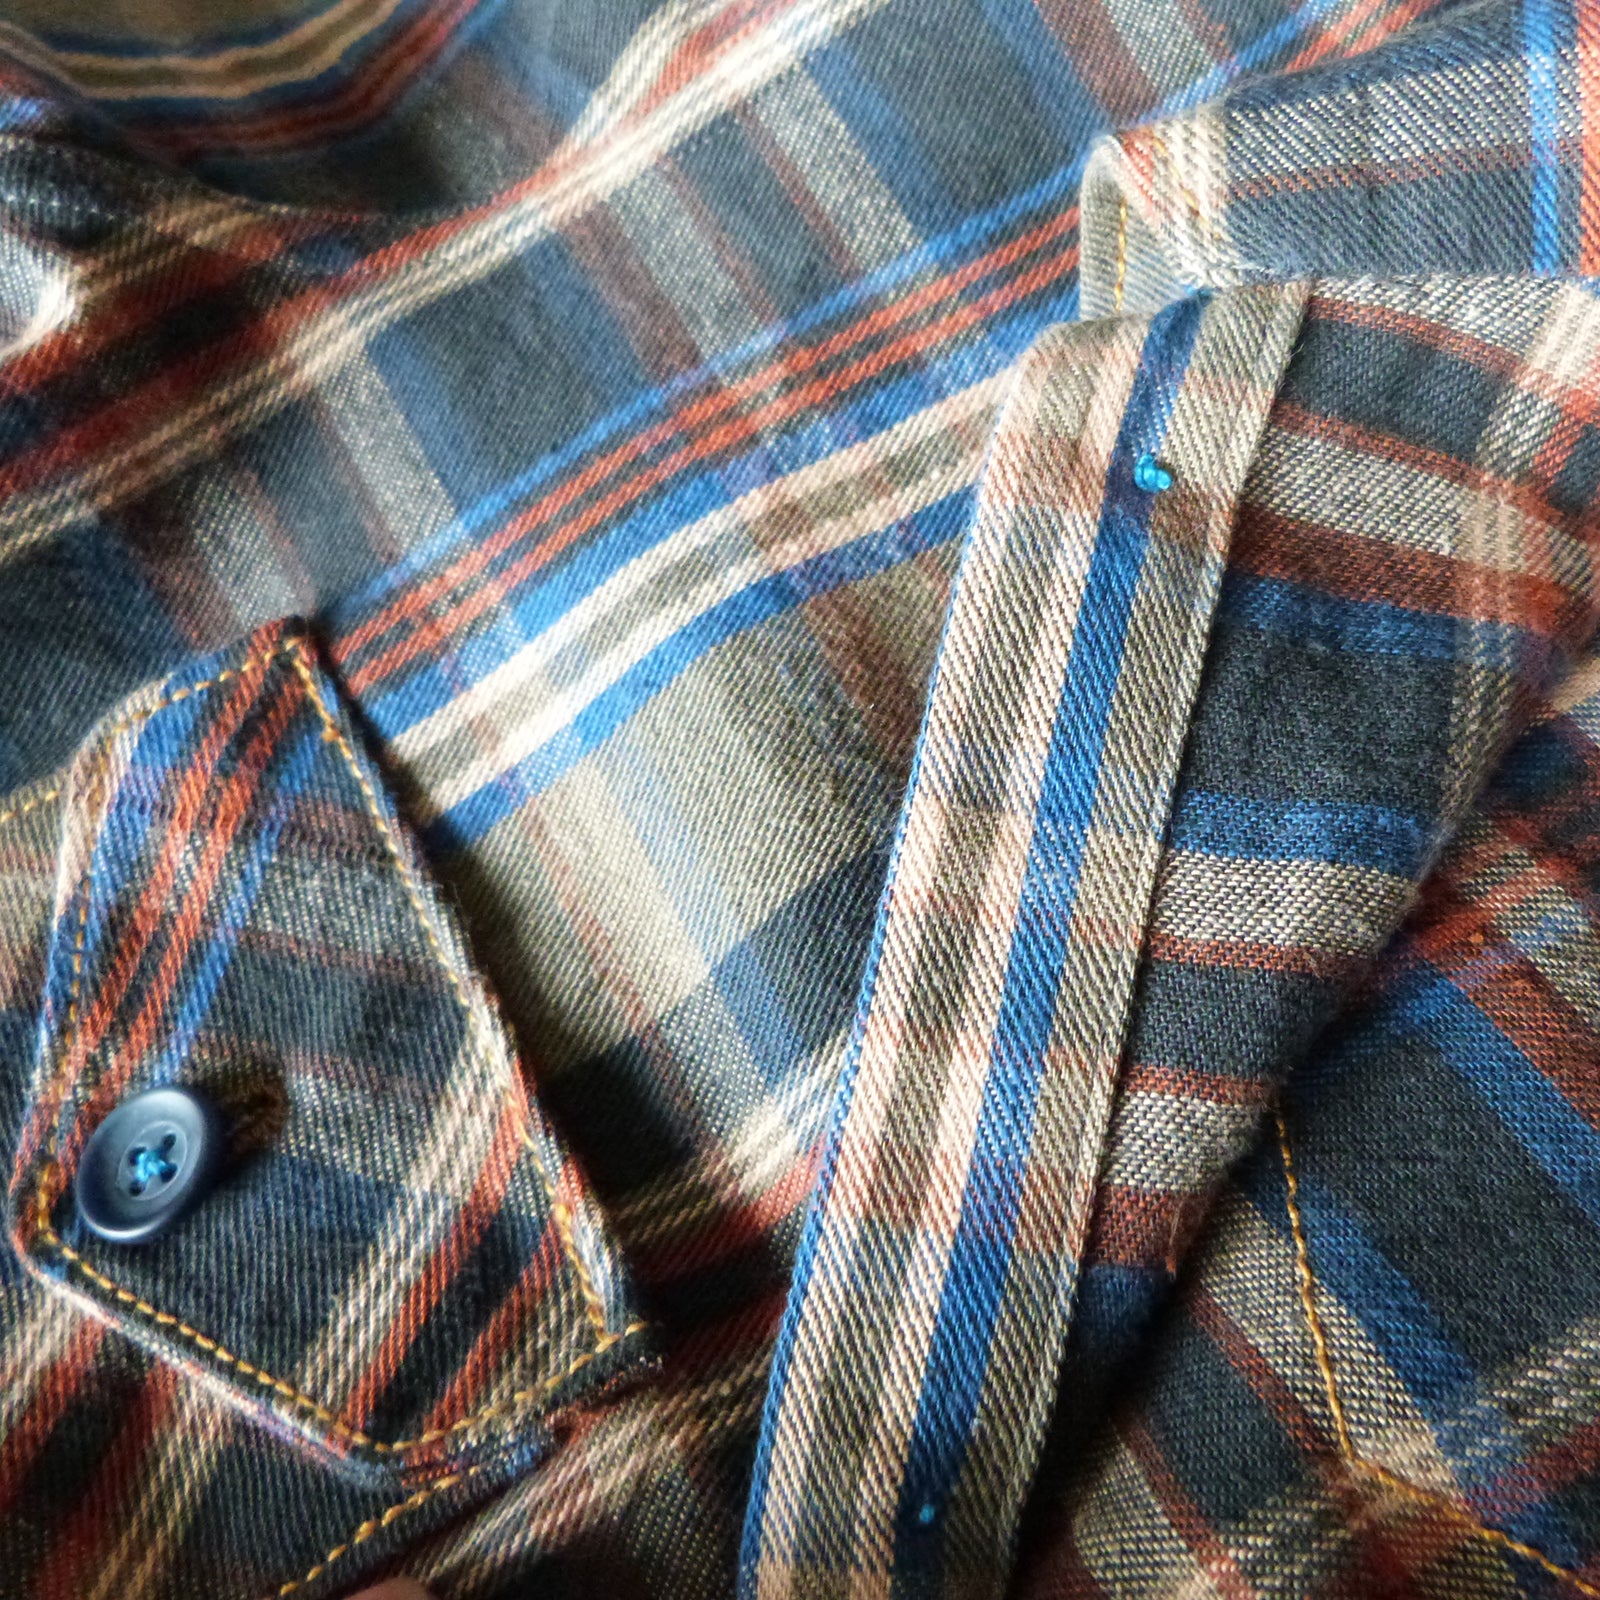 What is Flannel Fabric: Properties, How its Made and Where